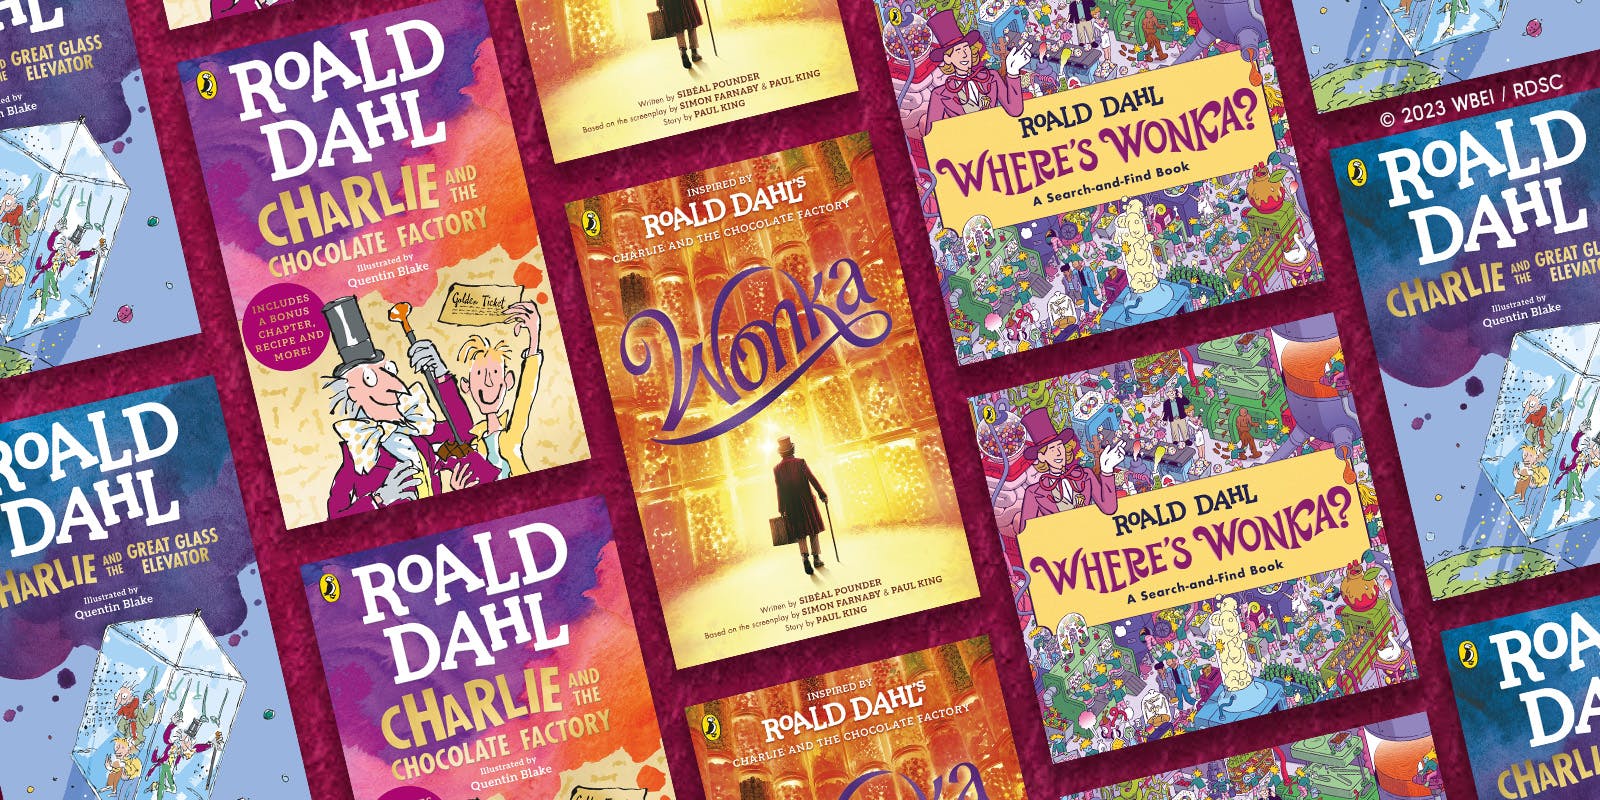 Get ready to meet a whole new side of Willy Wonka - Penguin Books